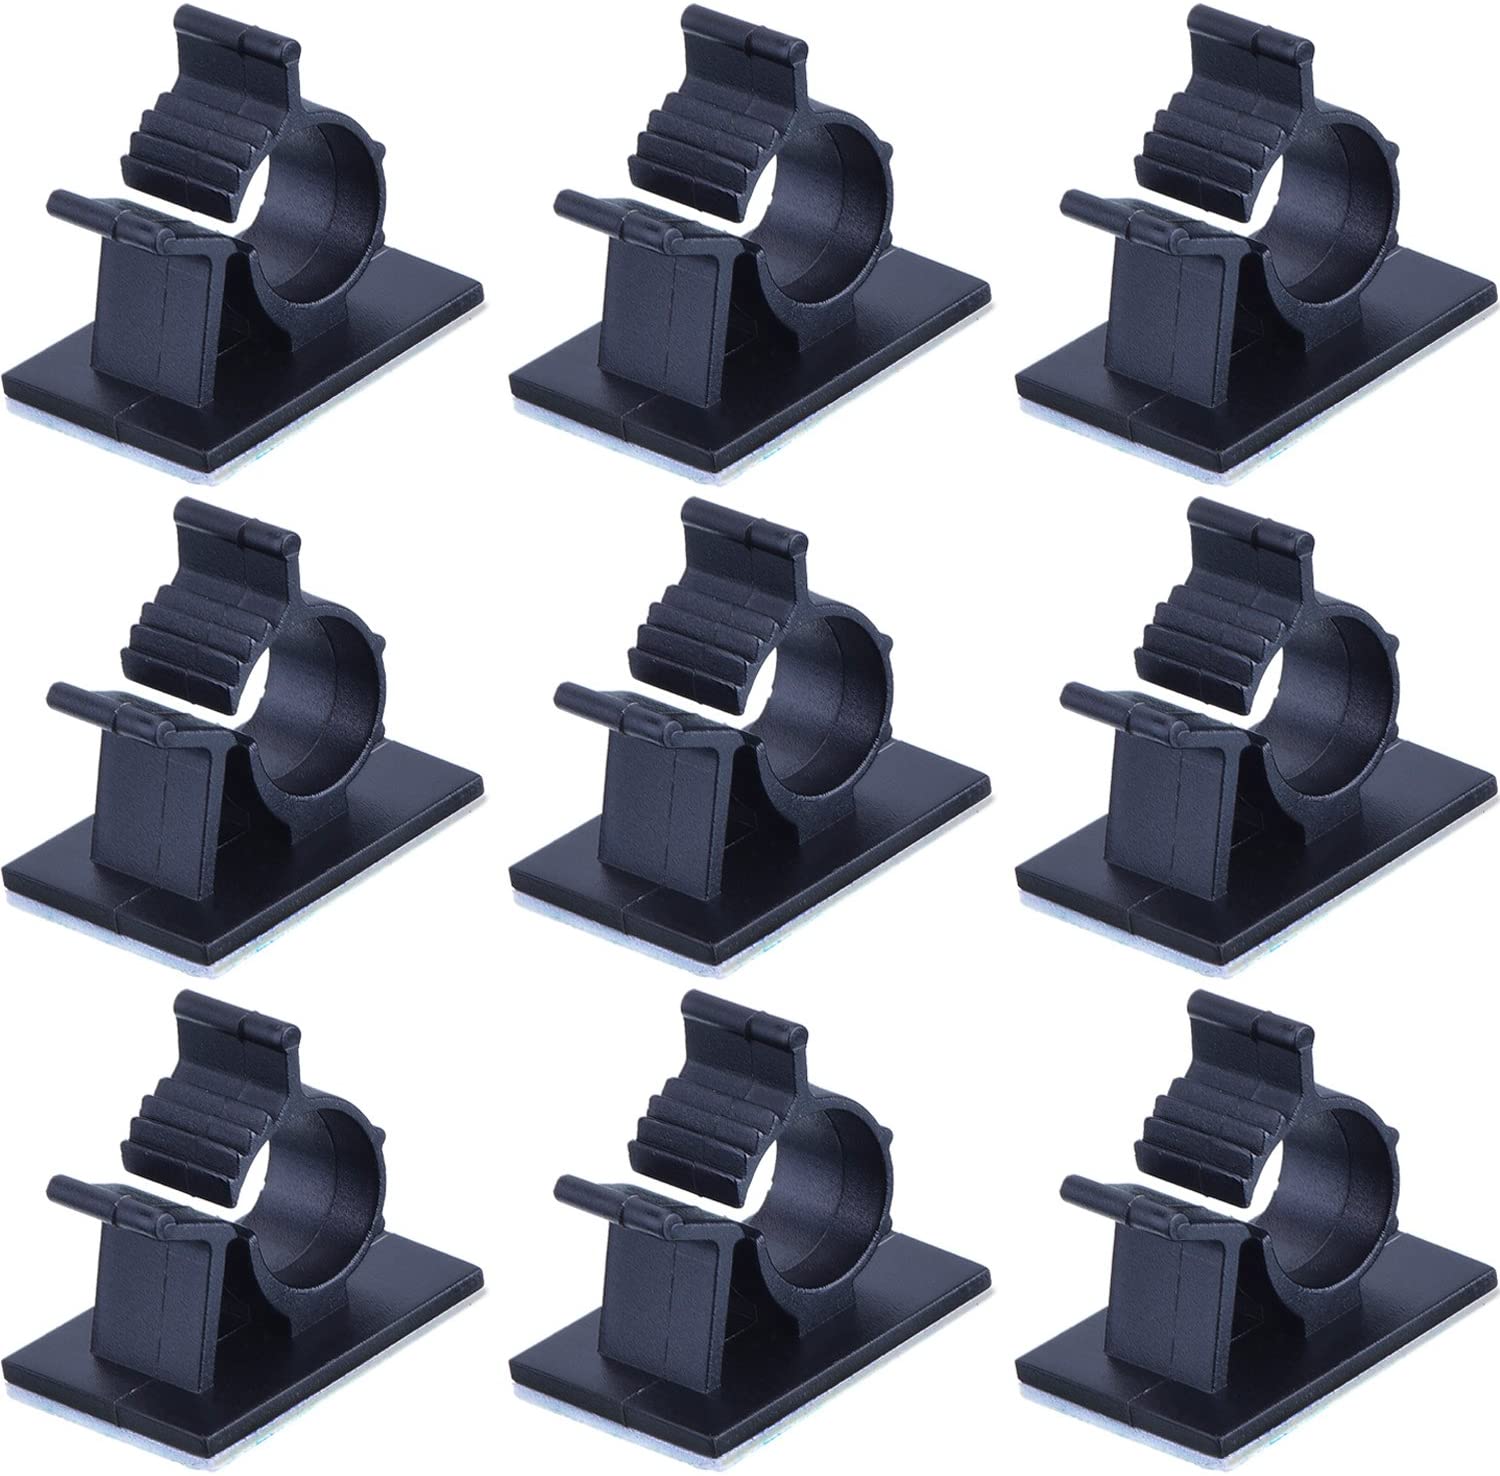 Adjustable Adhesive Cable Clips for Fiber Optic Cable Management